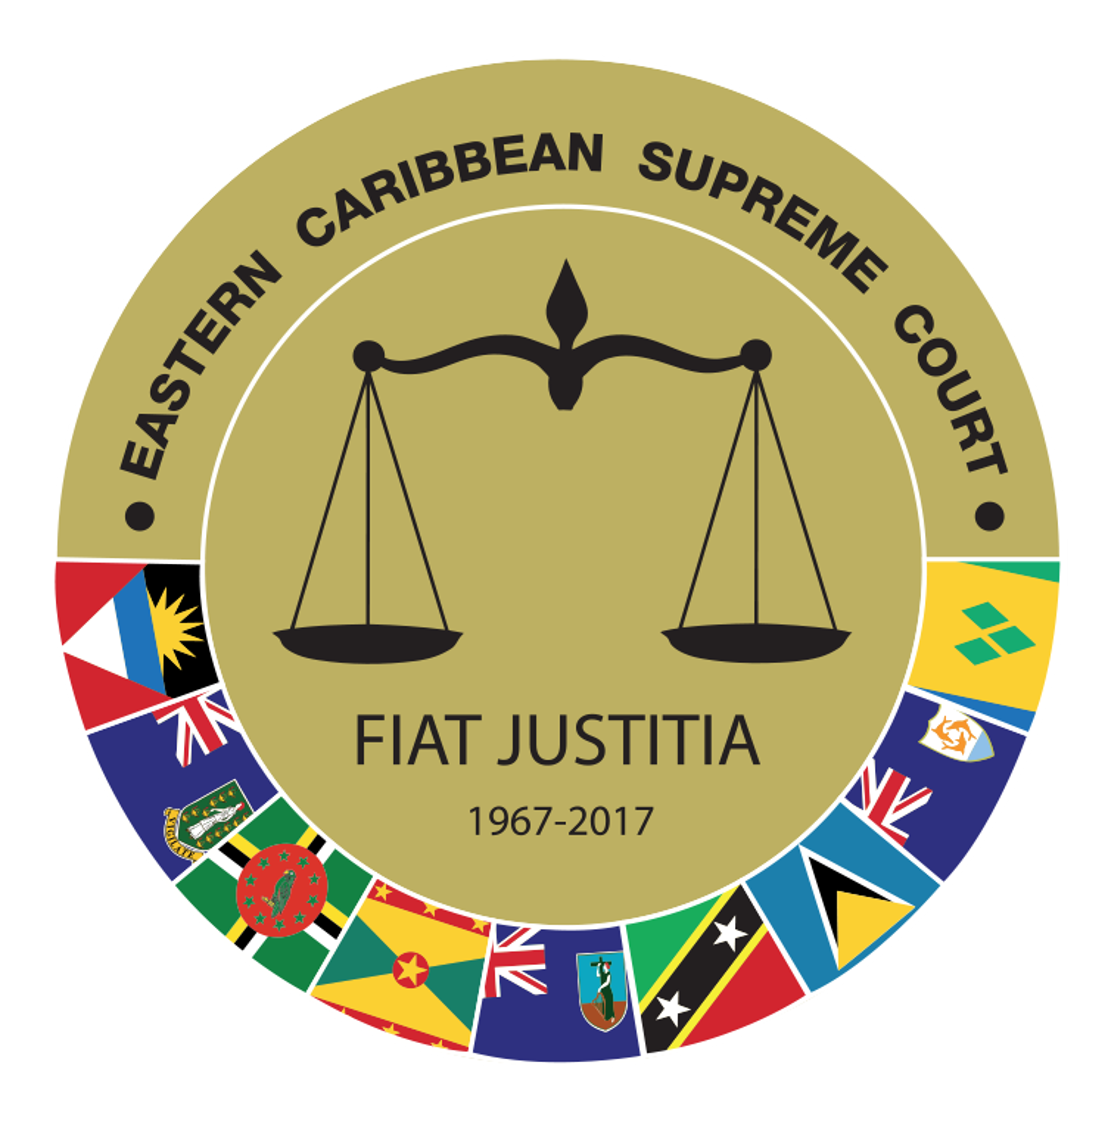 OECS Congratulates the Eastern Caribbean Supreme Court on its 55th Anniversary